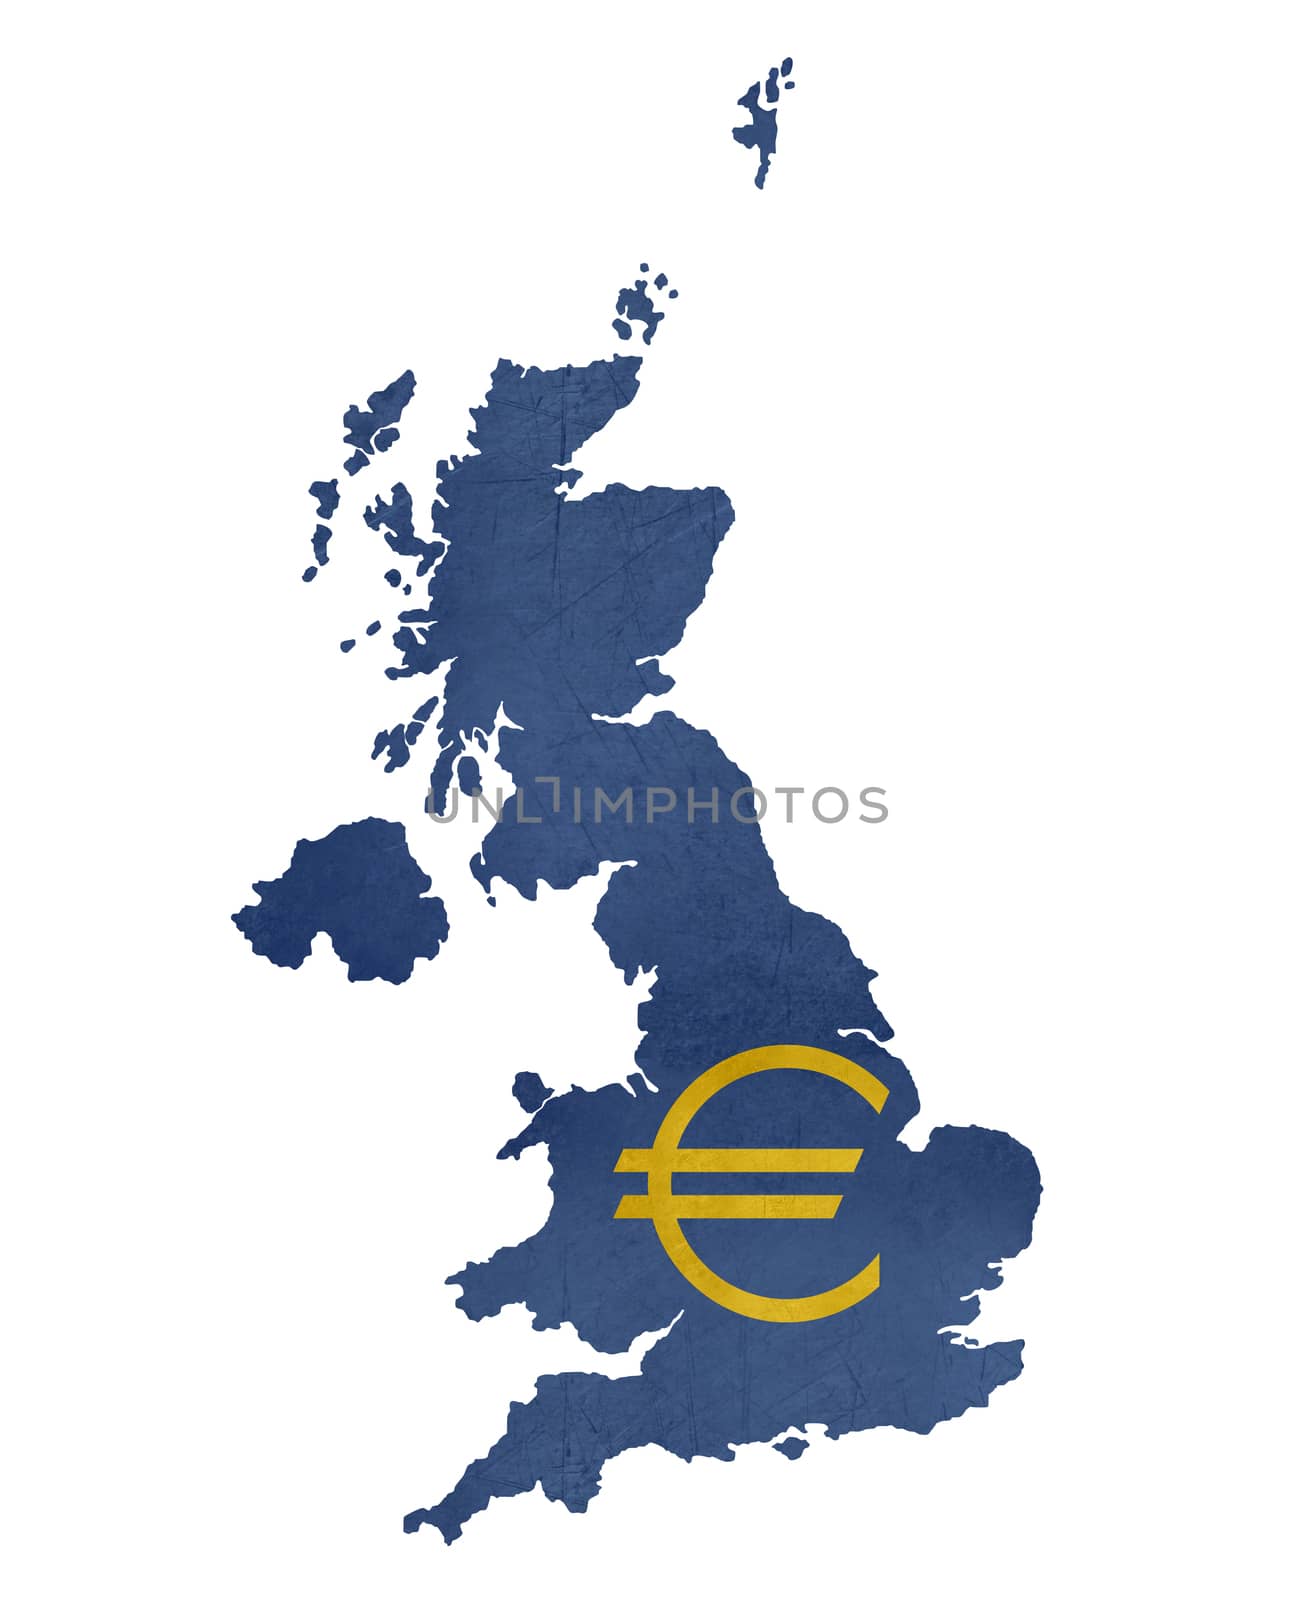 European currency symbol on map of United Kingdom isolated on white background.